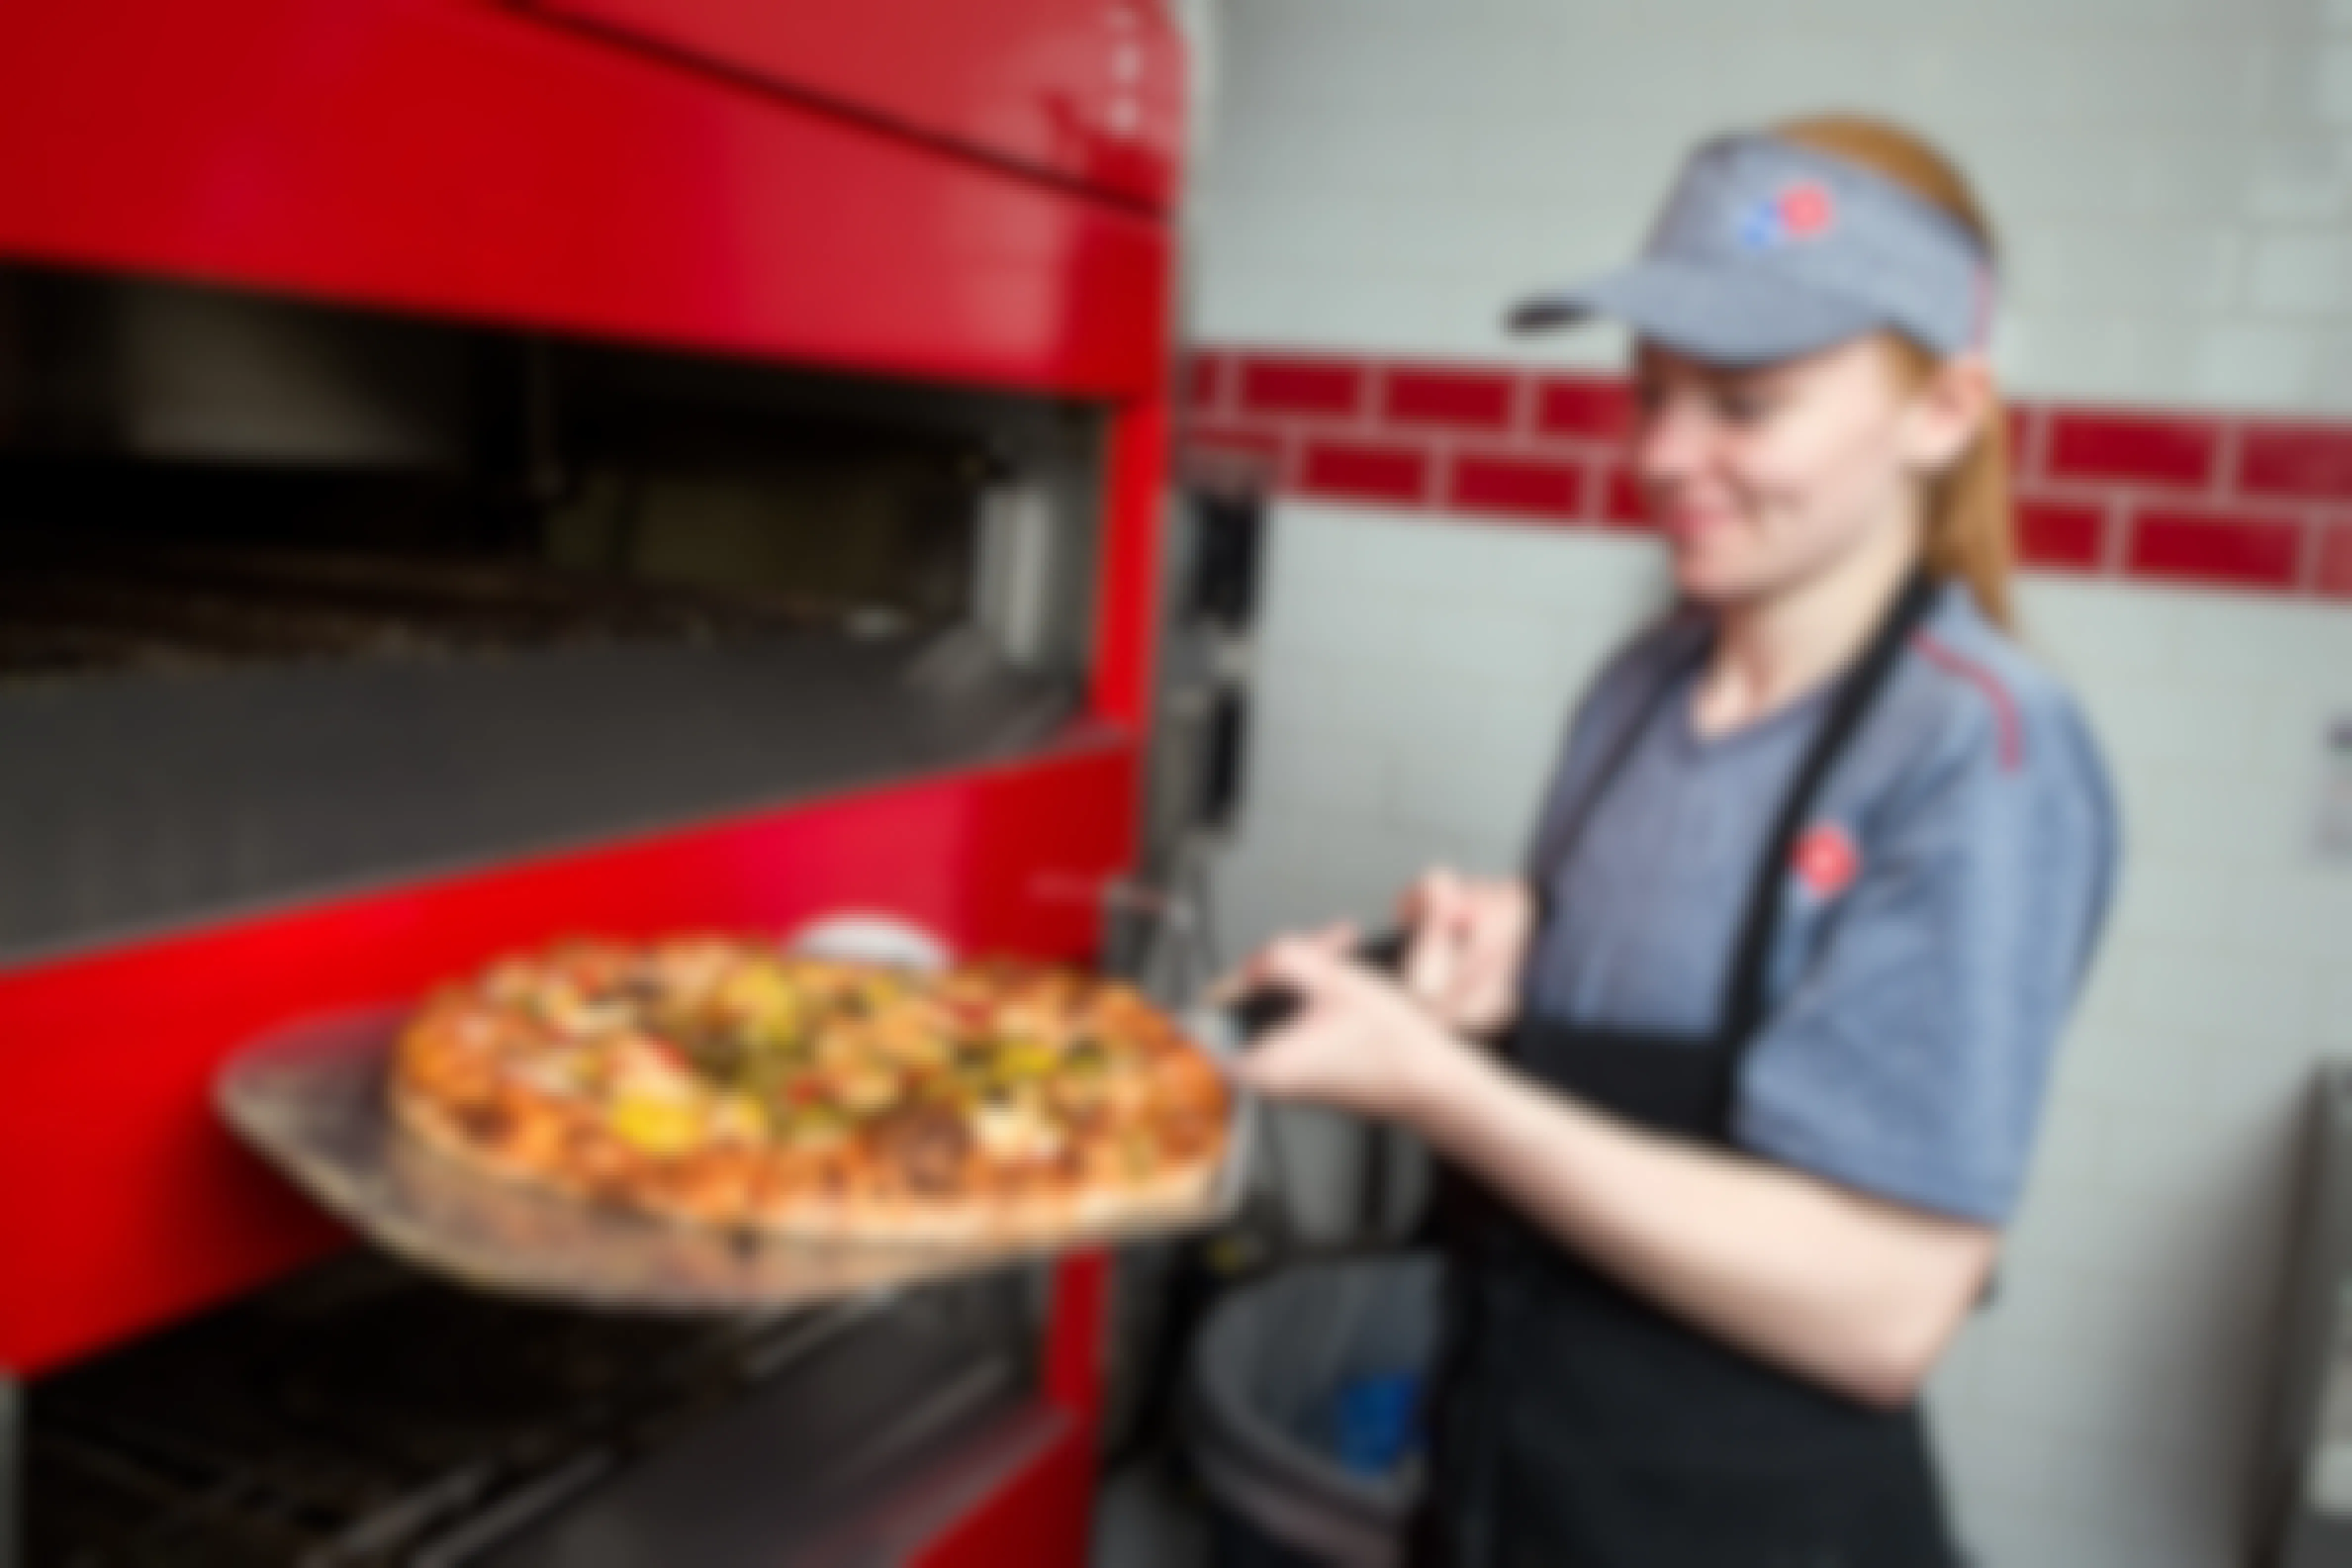 A Domino's employee taking a pizza out of the oven.